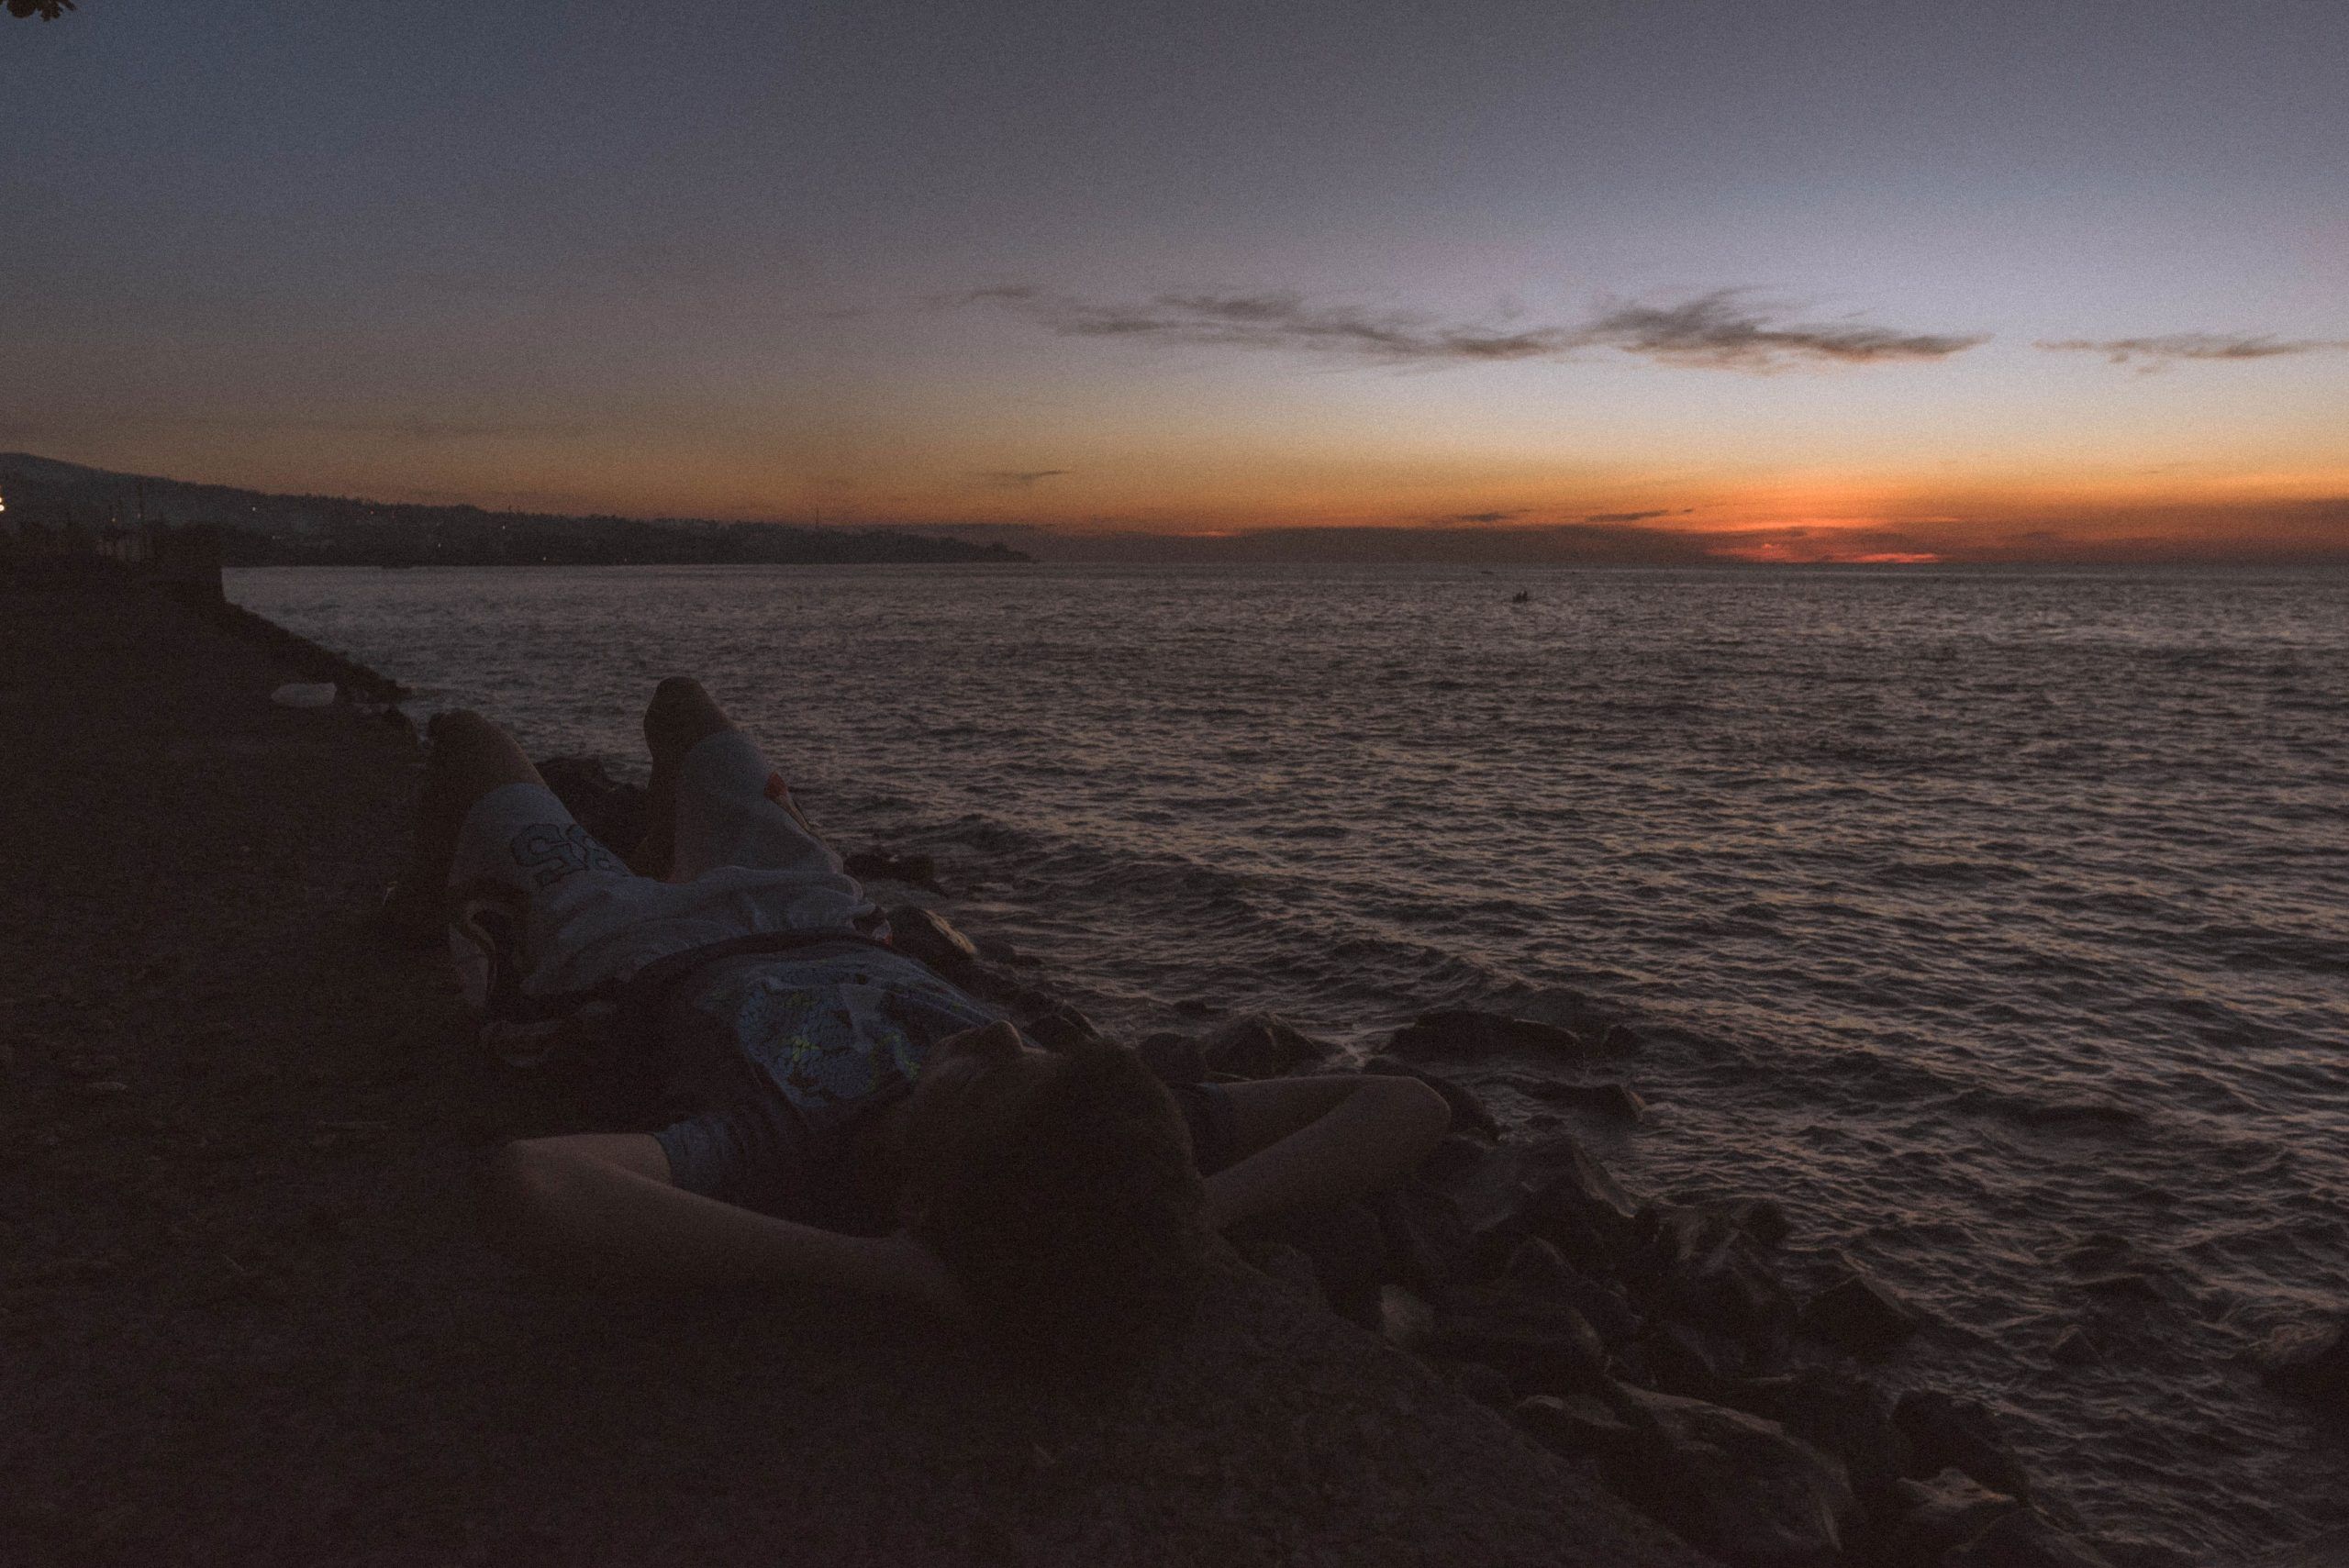 A person laying on the beach watching the sunset. - Grunge